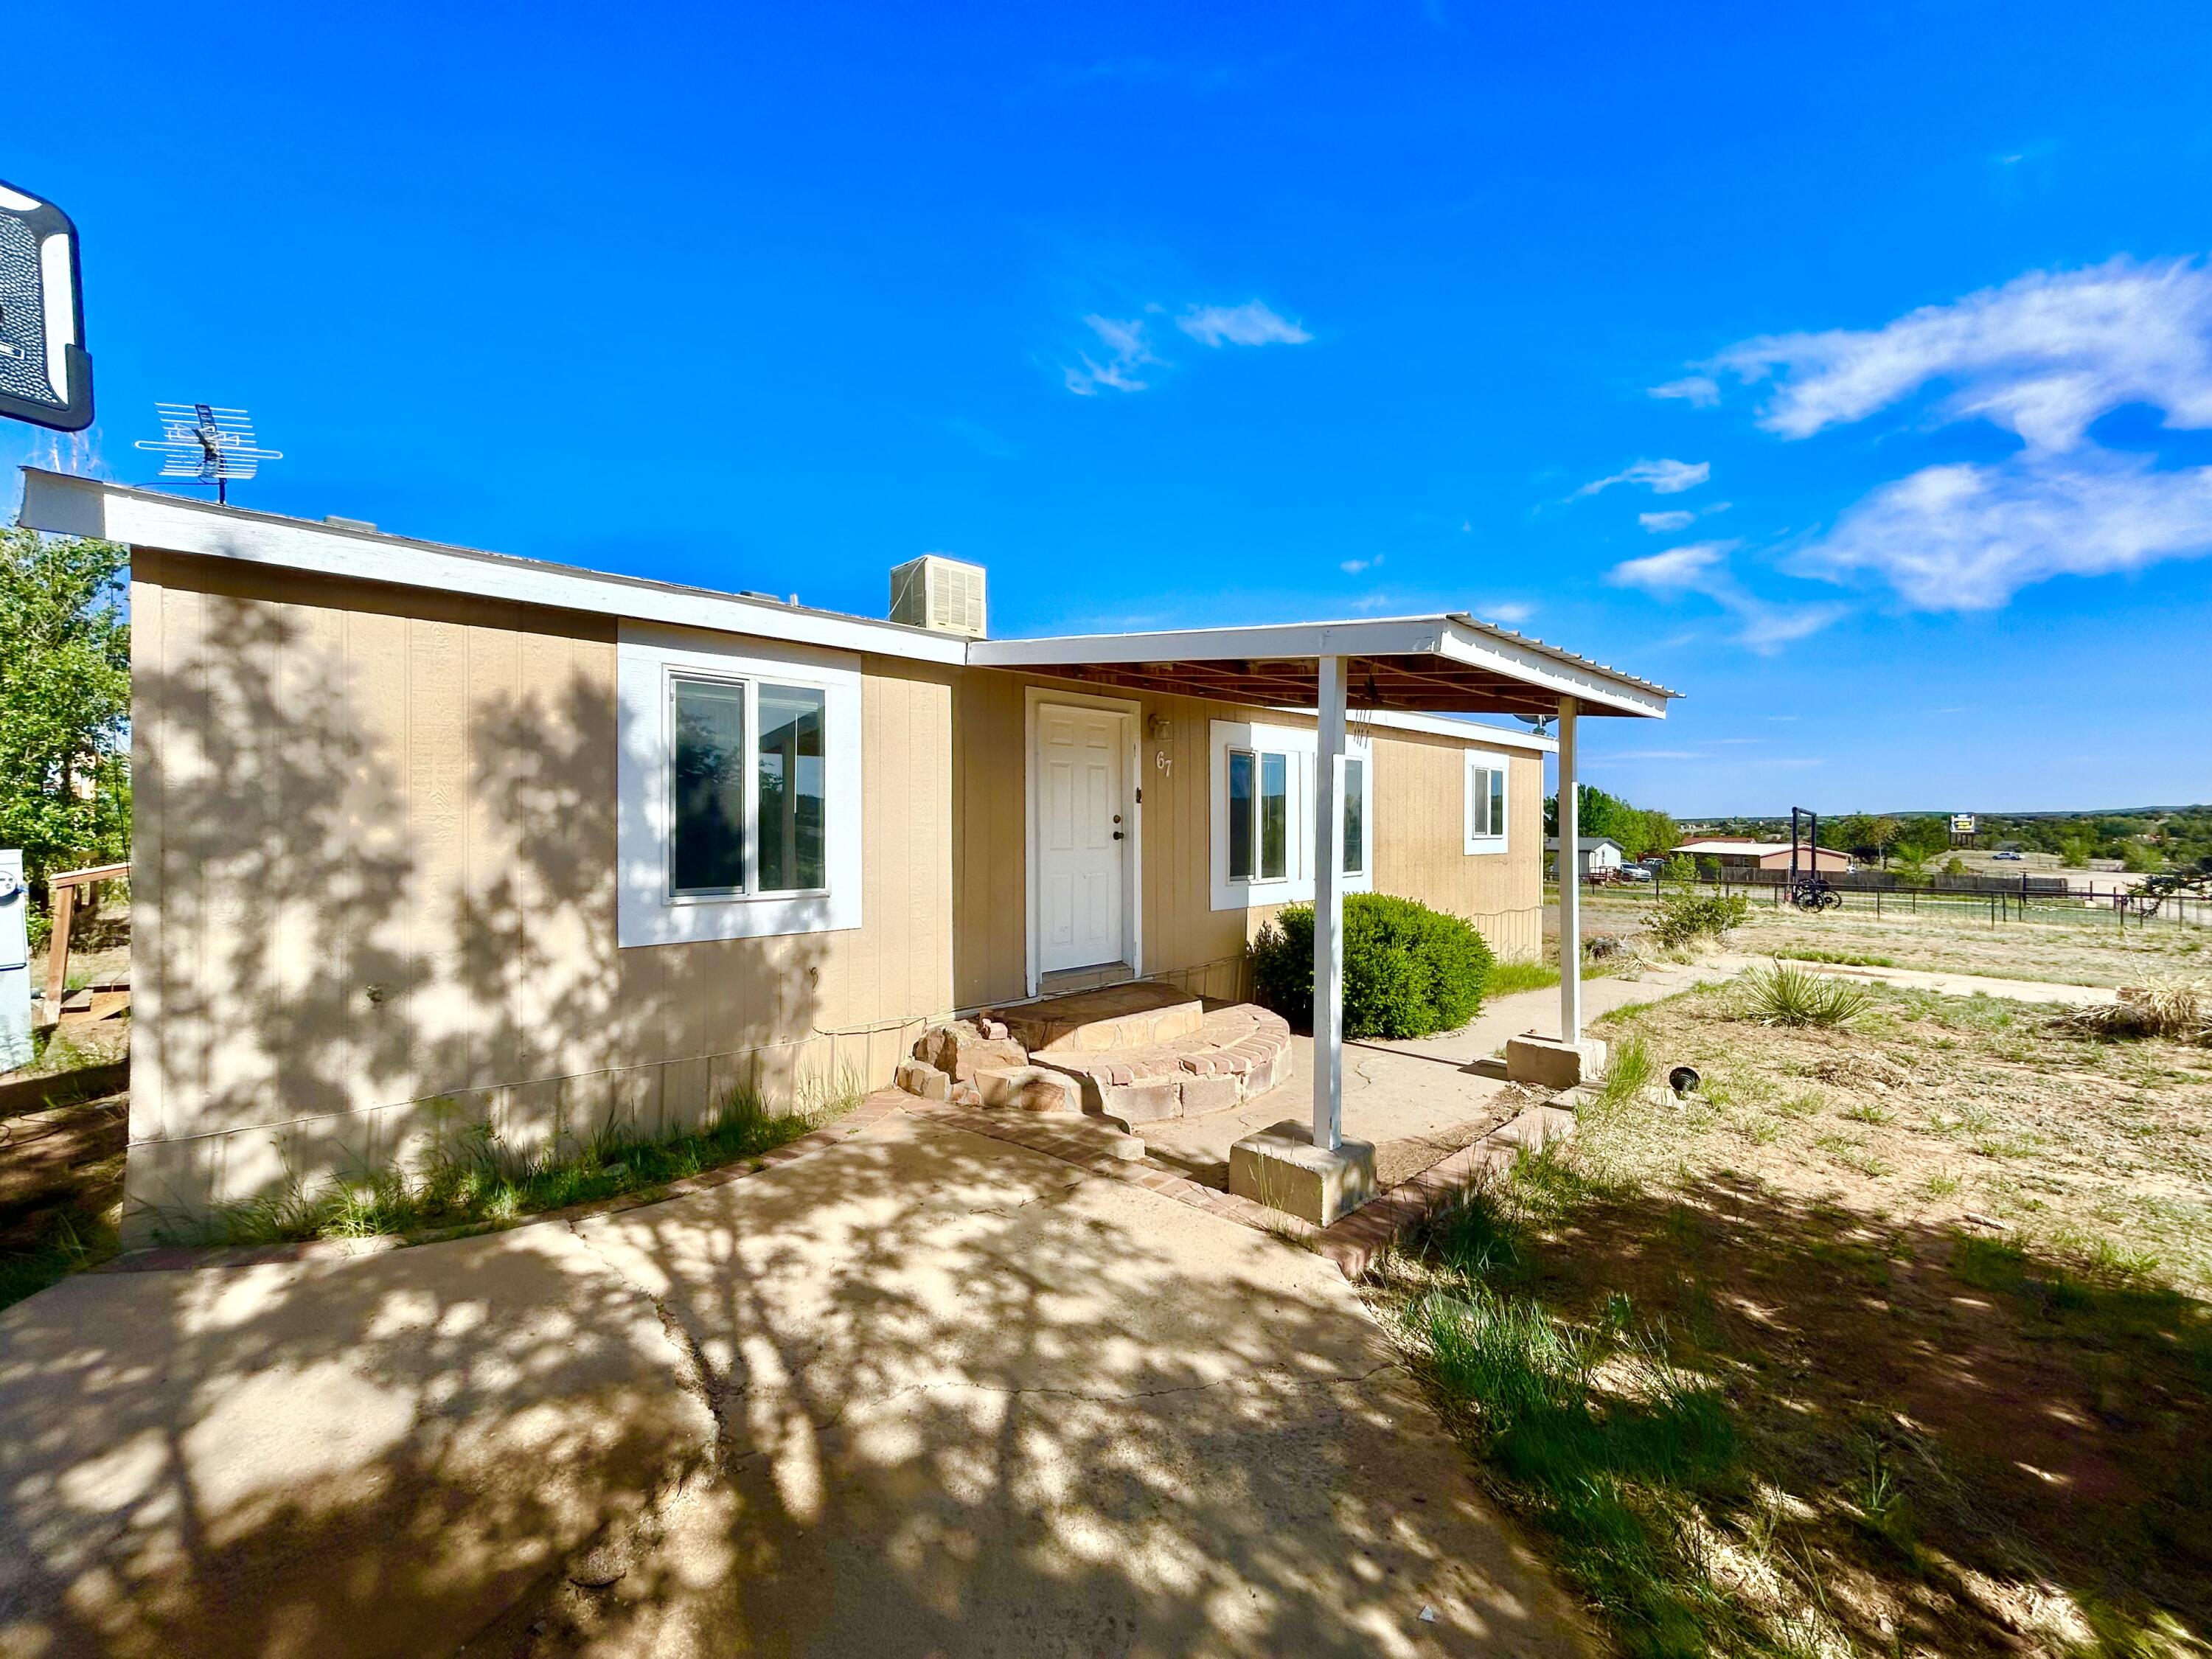 Welcome to Edgewood New Mexico.   3 bedroom 2 bathroom split floor plan.    Refrigerated  air conditioning.   New paint and updated flooring.